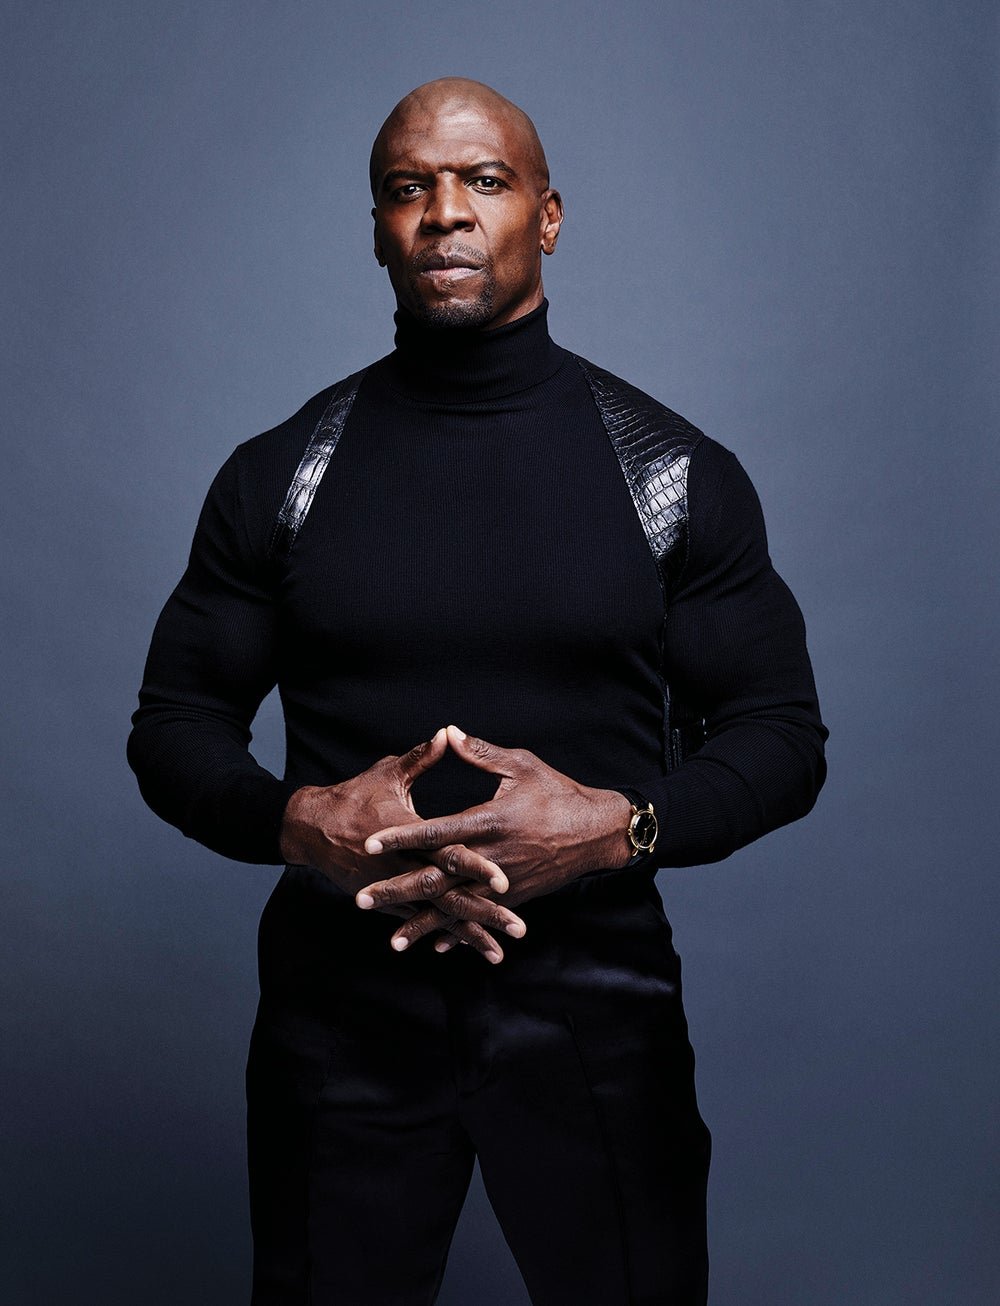 Terry Crews's religion in question